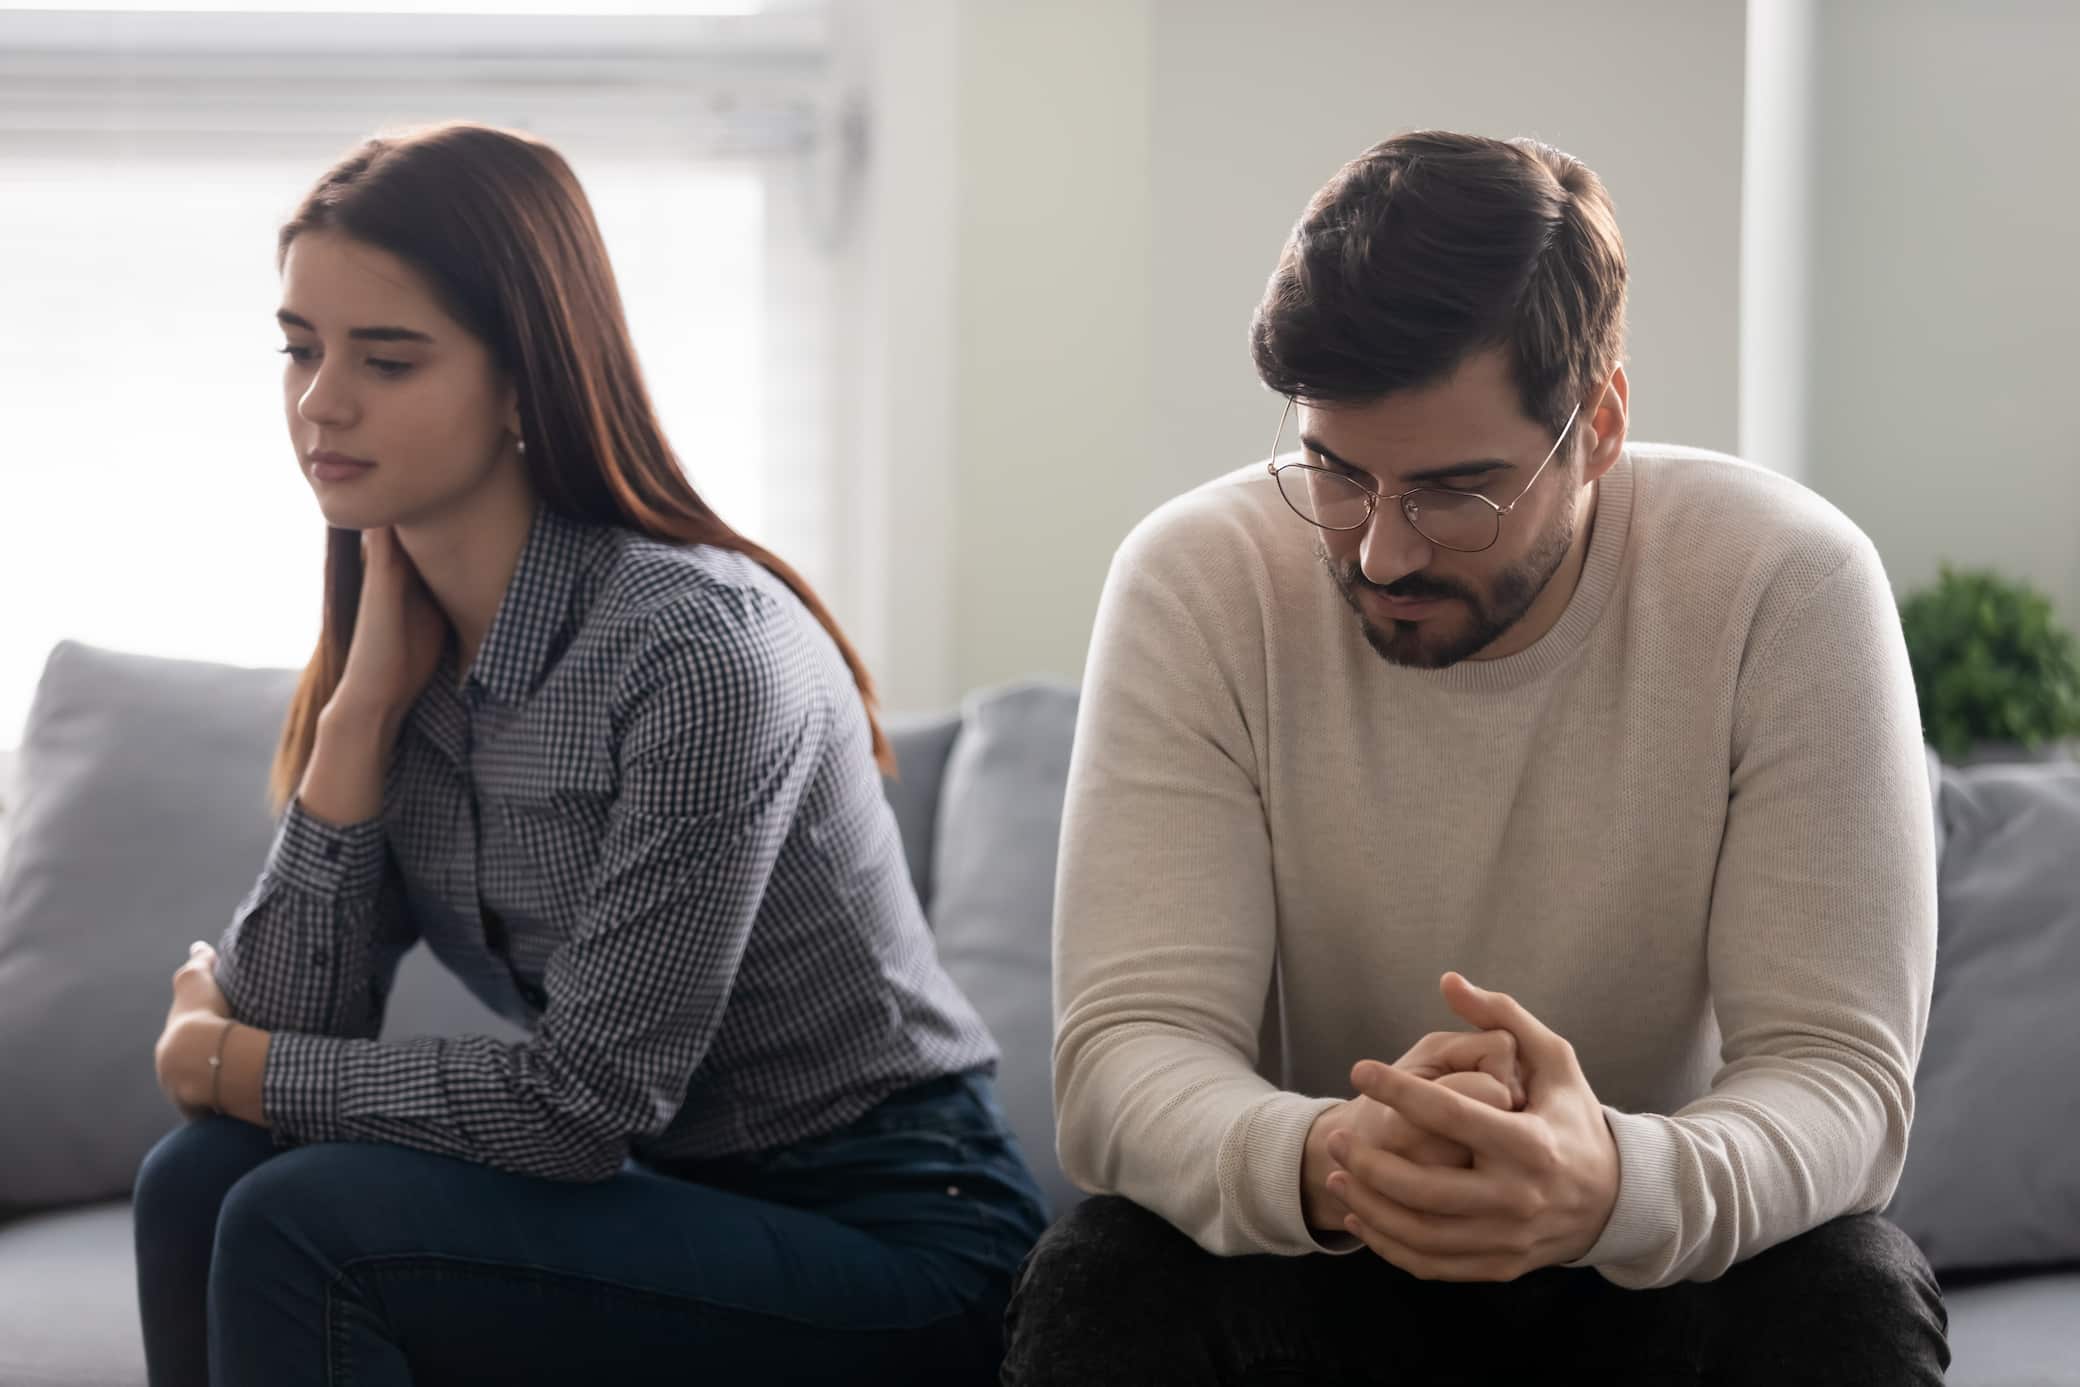 Relationship Anxiety: What Is It & How Can I Deal With It?